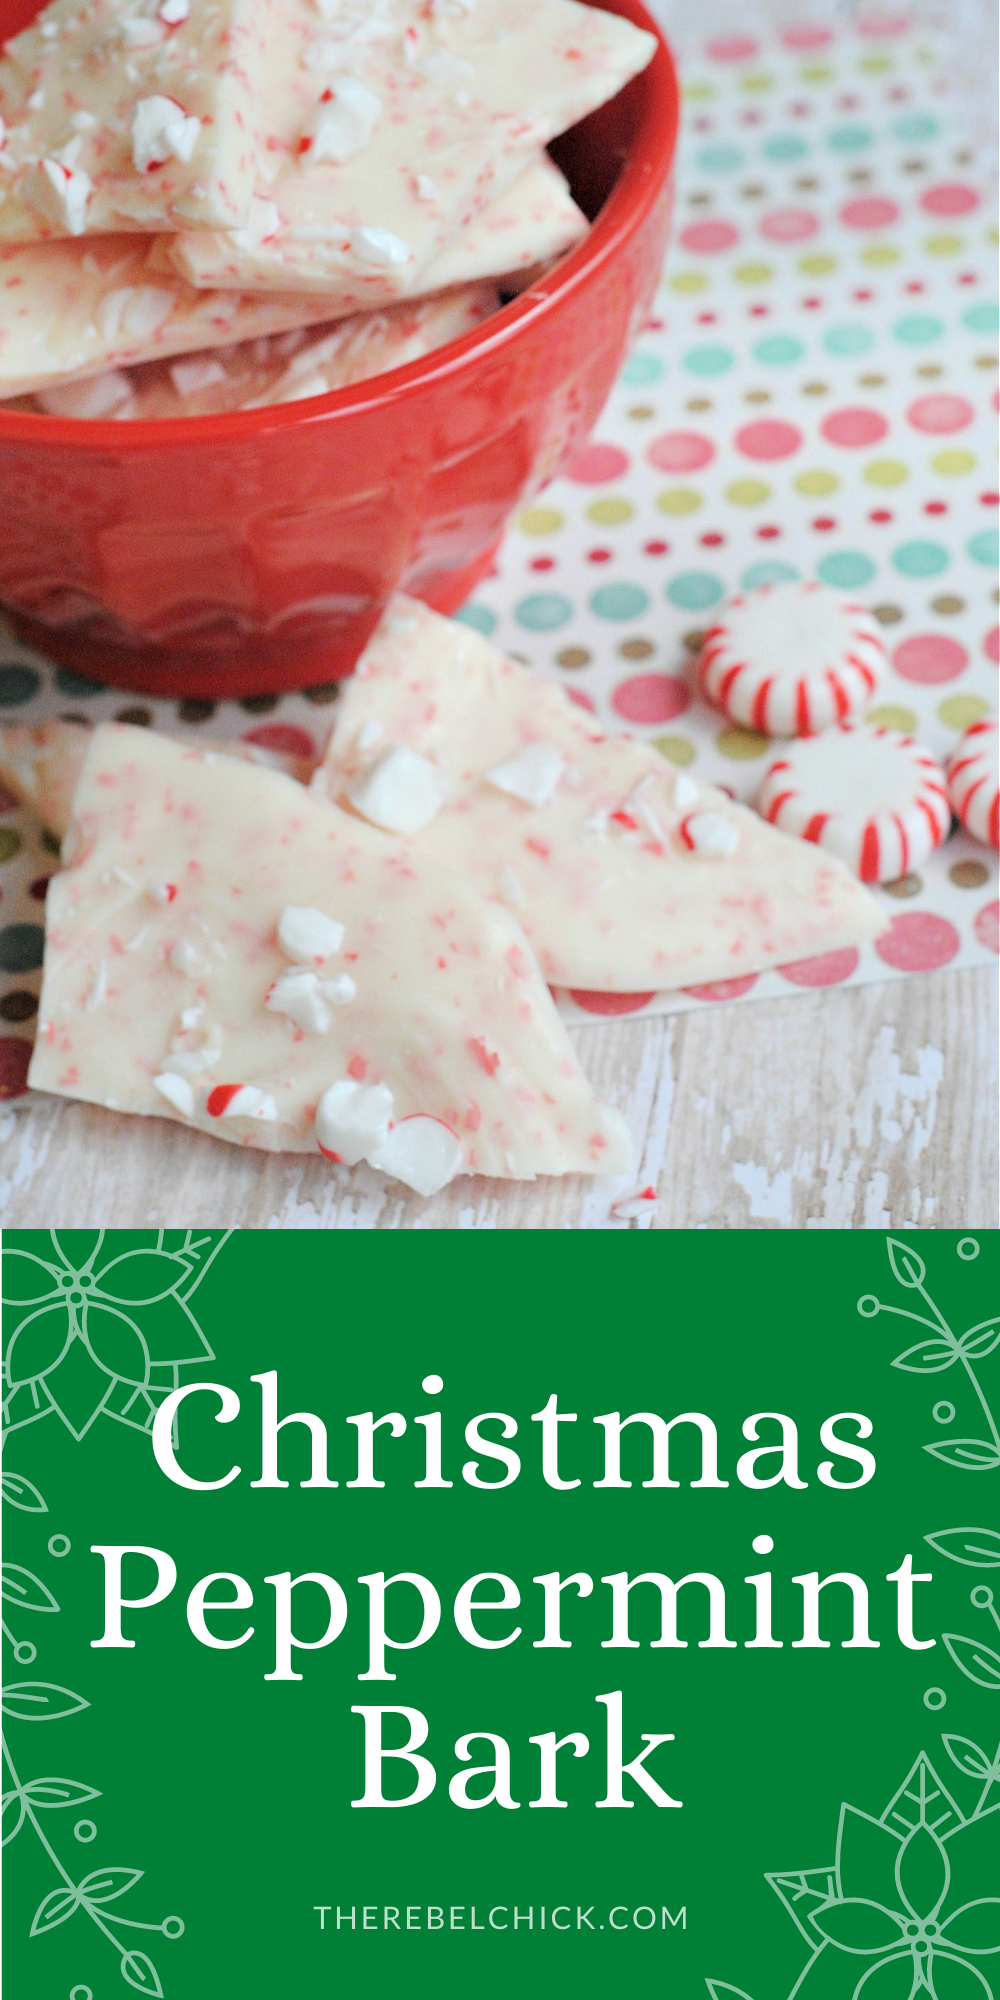 Celebrate National Peppermint Bark Day Dec 1 with a Christmas Peppermint Bark Recipe